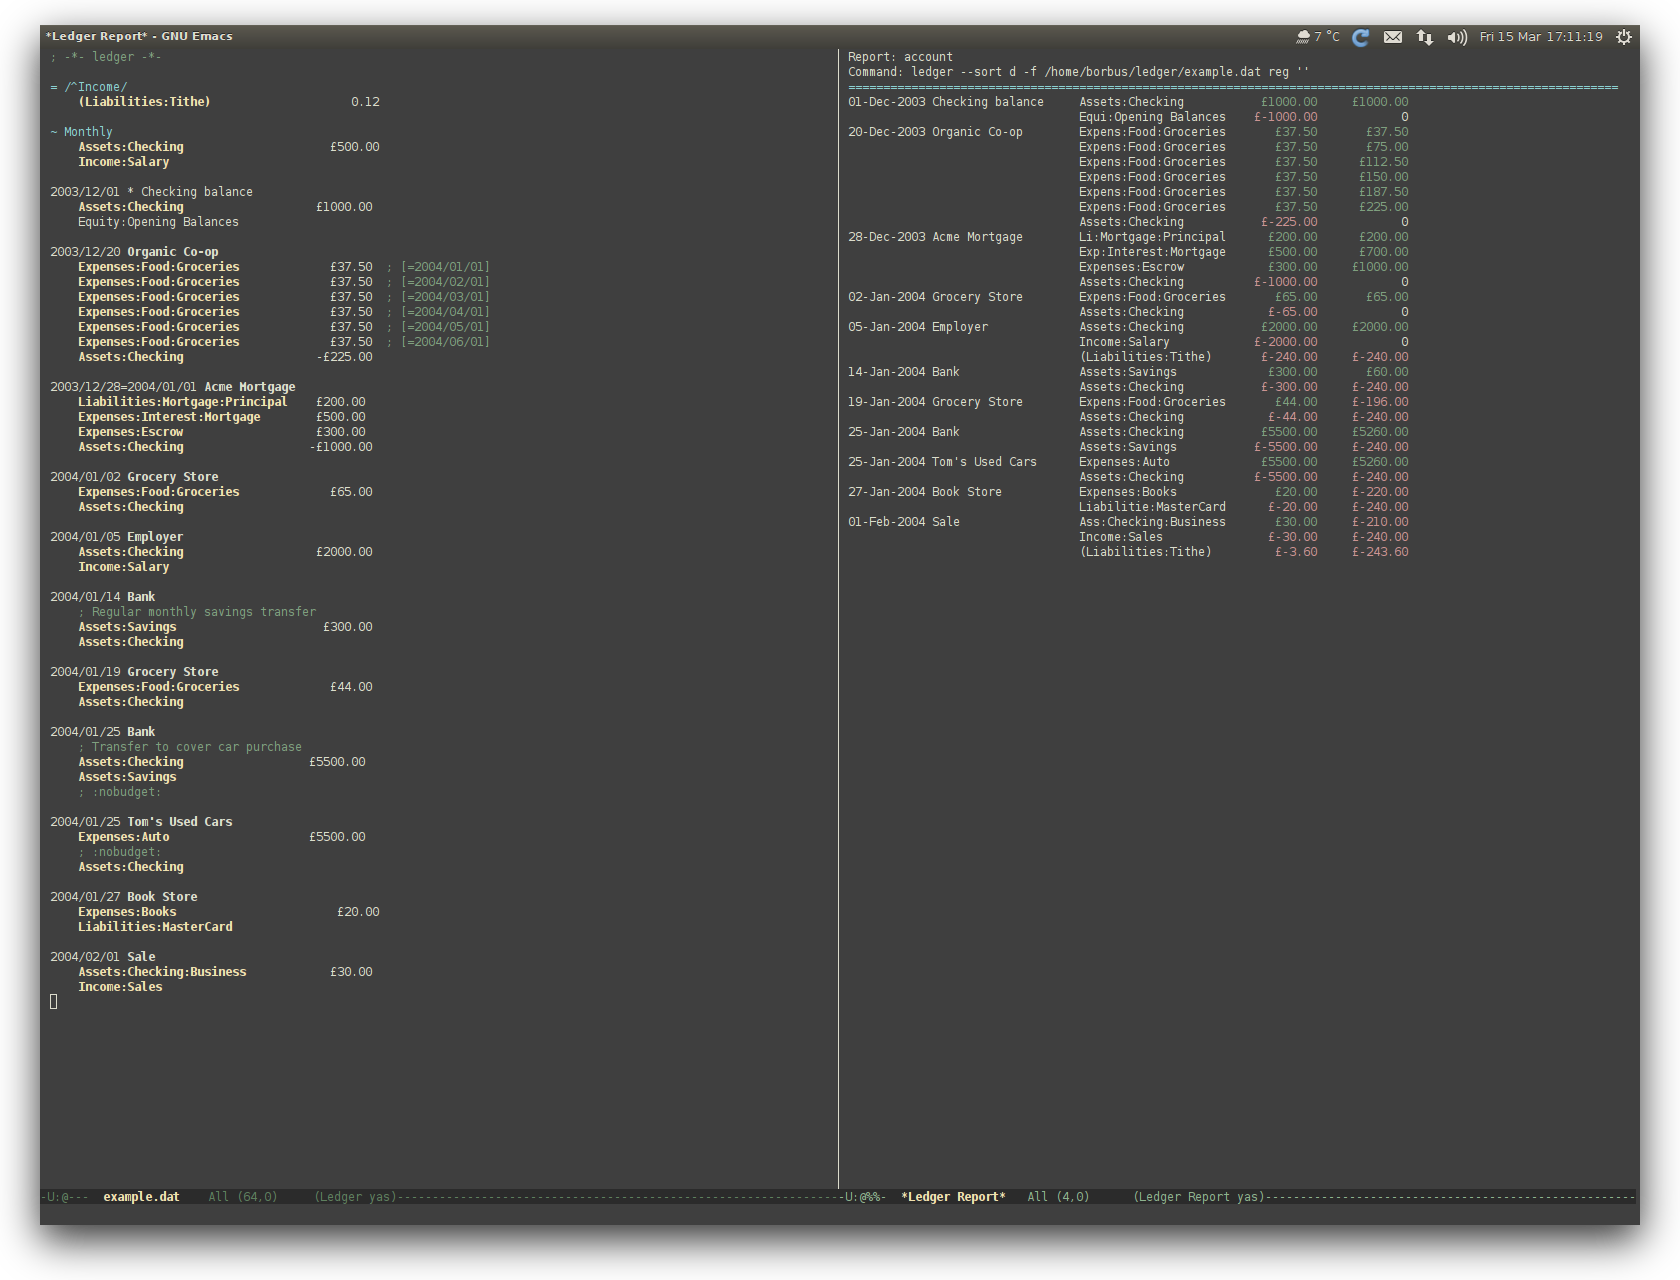 /TakeV/spacemacs/media/commit/aded834a57ceb7c0fc0ca210ad122abc9e22699c/layers/finance/img/ledger.png